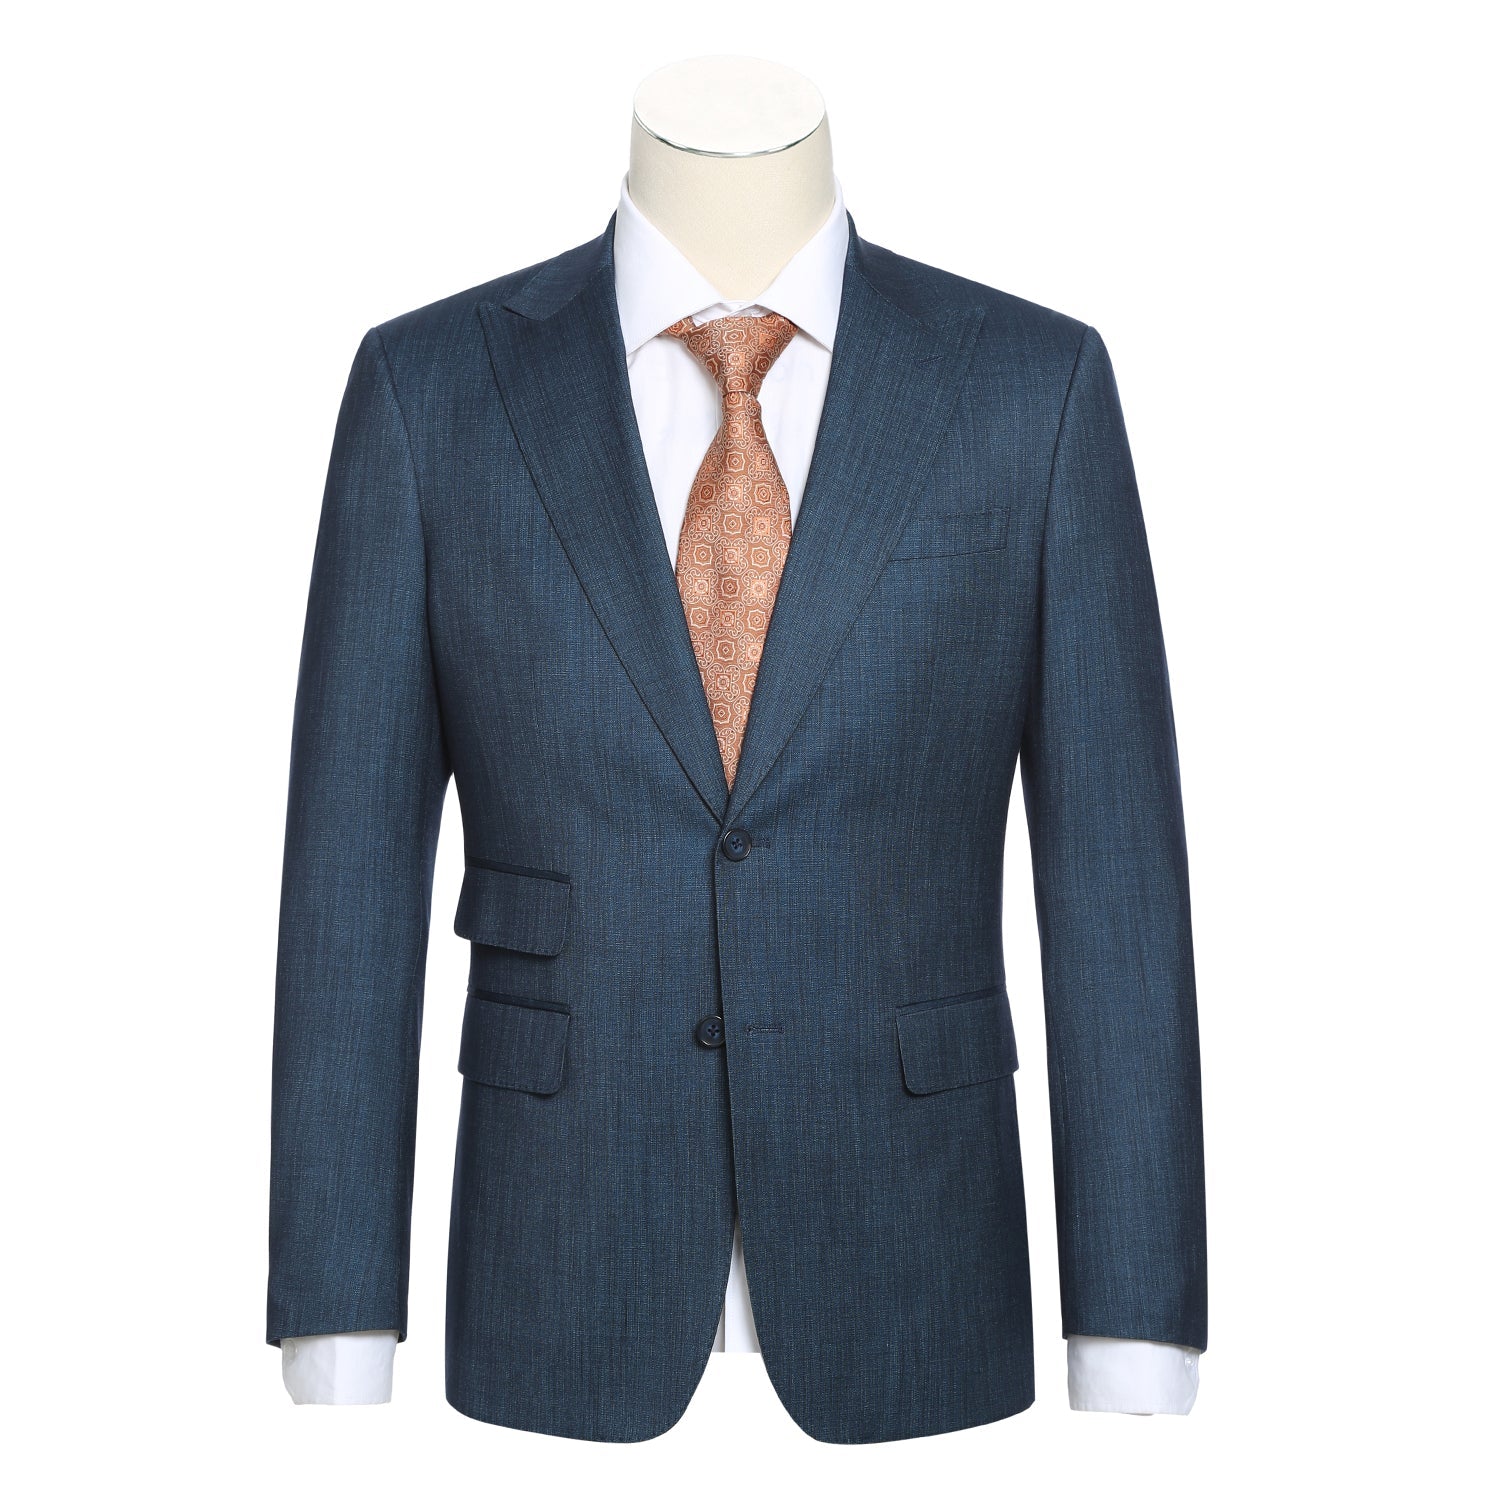 Stretch Performance Double Breasted SLIM FIT Suit in Marine by English Laundry